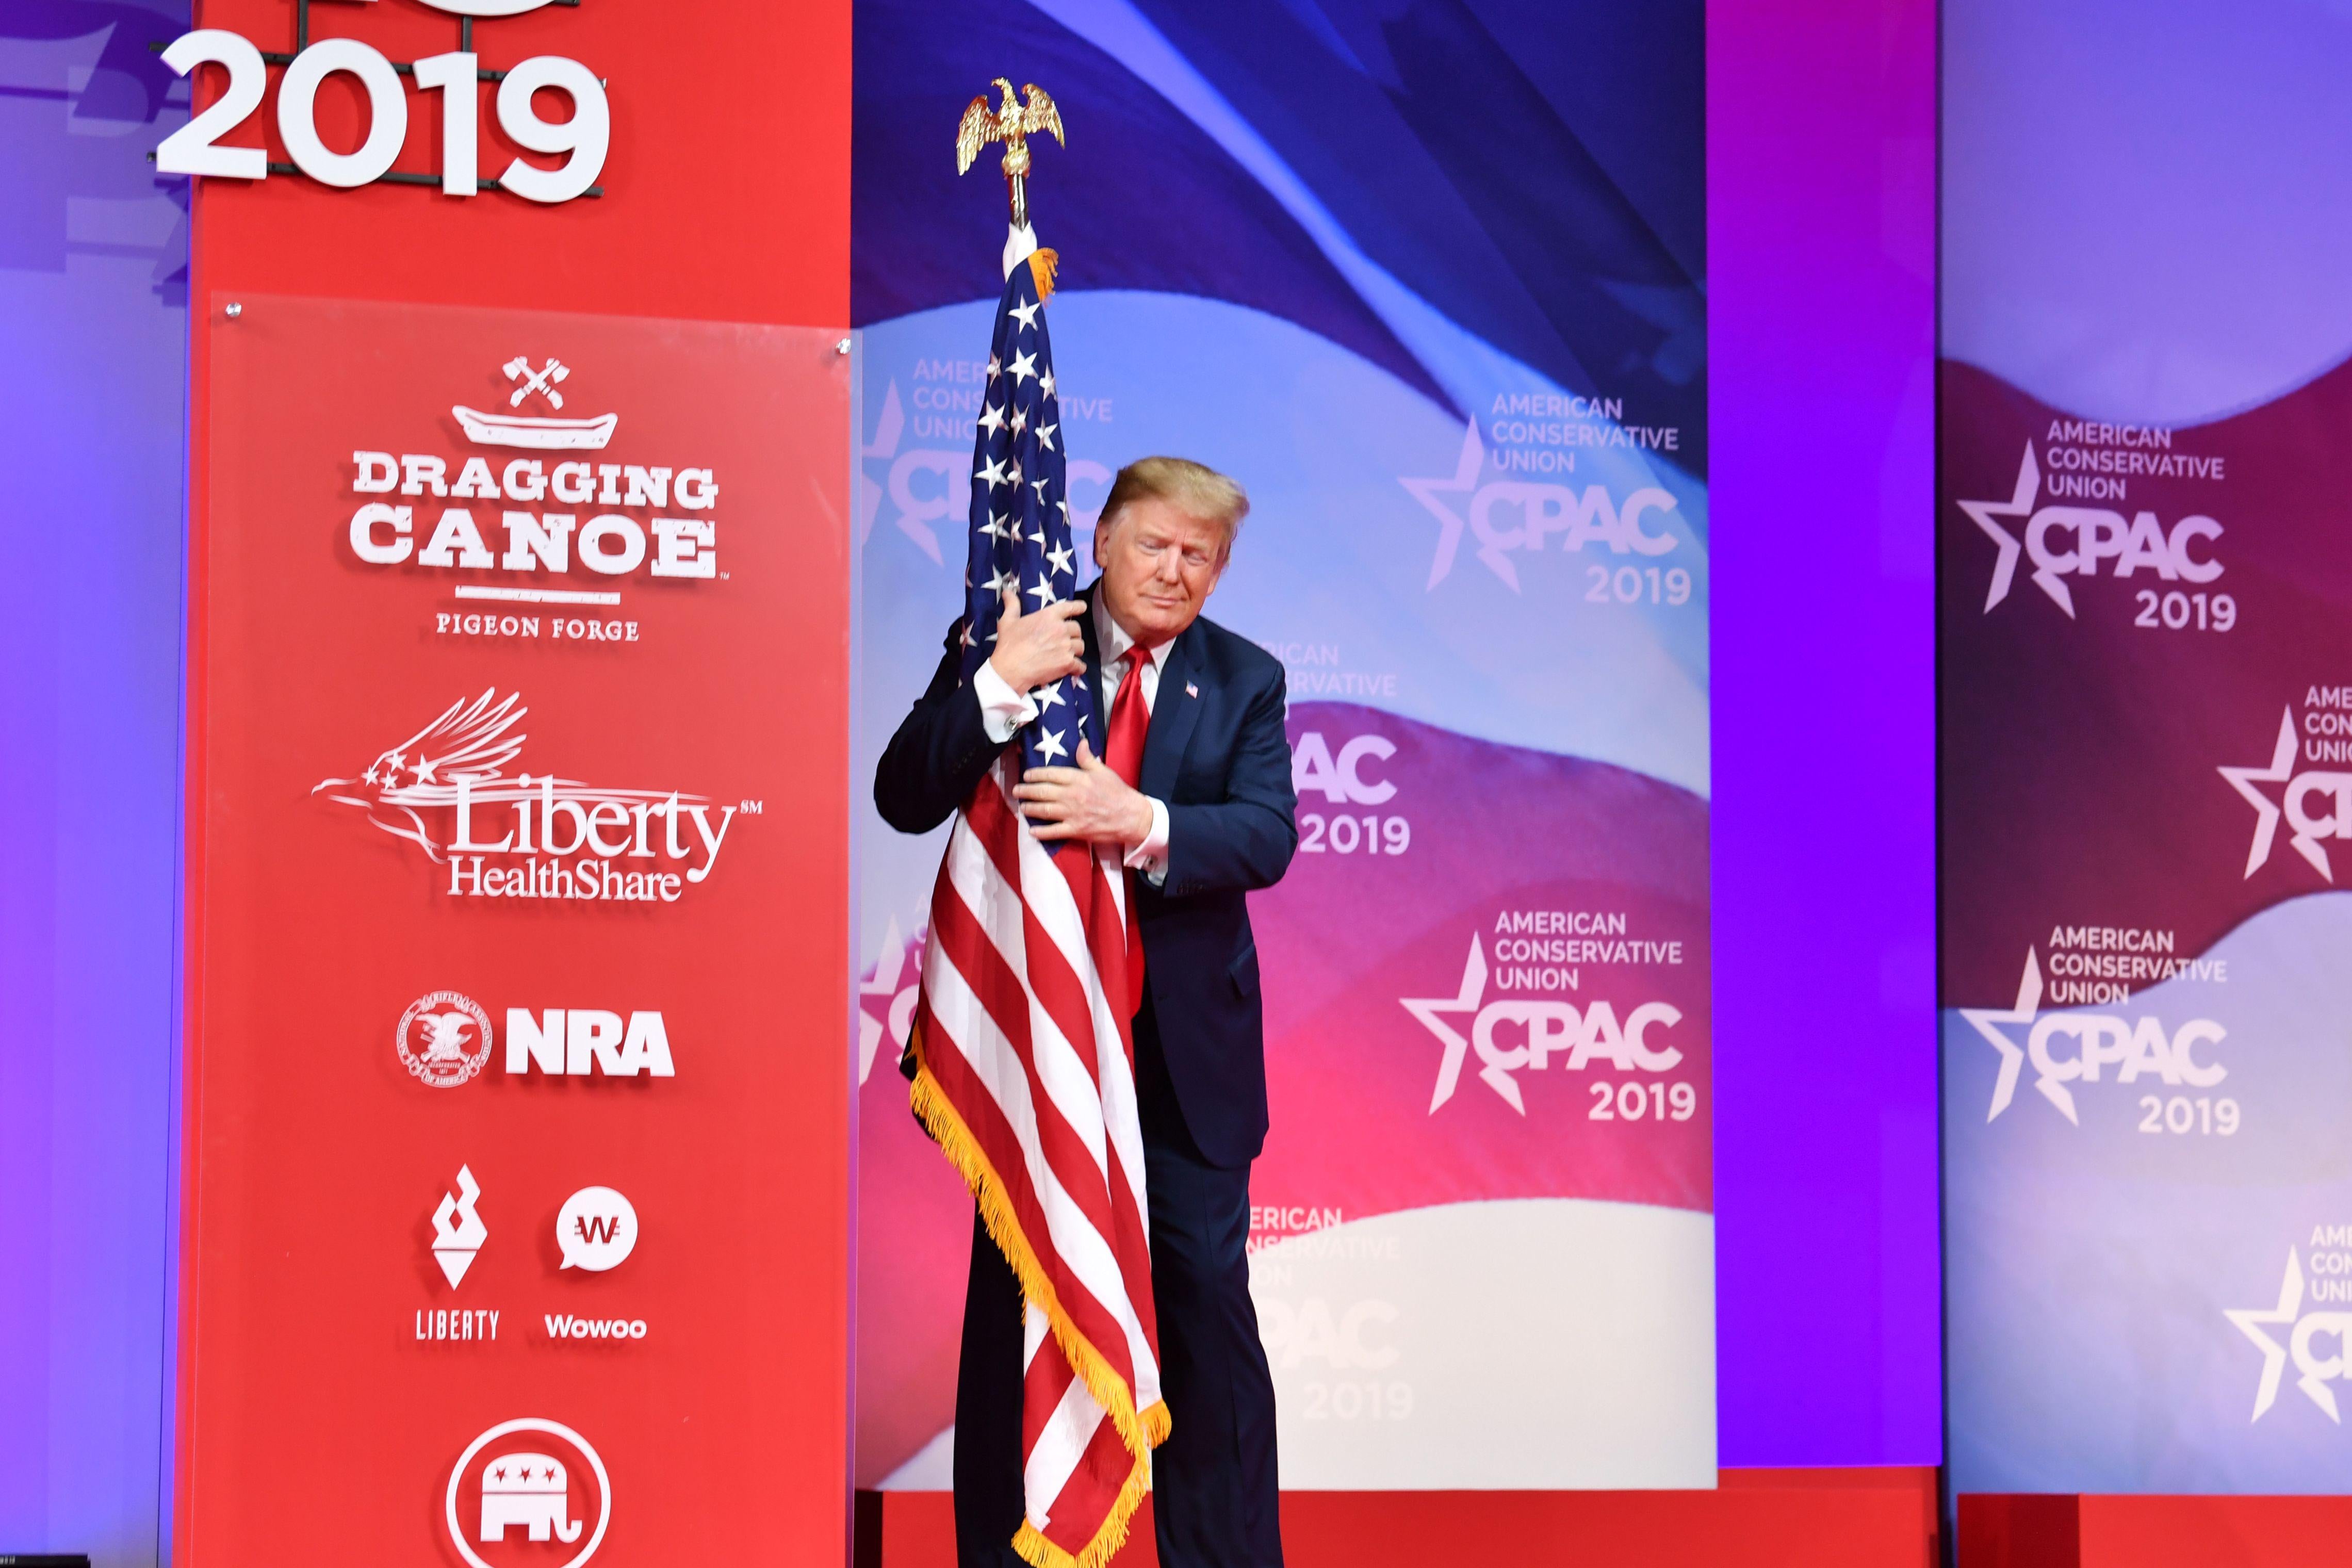 President Donald Trump hugs the U.S. flag as he arrives to speak at the annual Conservative Political Action Conference (CPAC) in National Harbor, Maryland, on March 2, 2019.